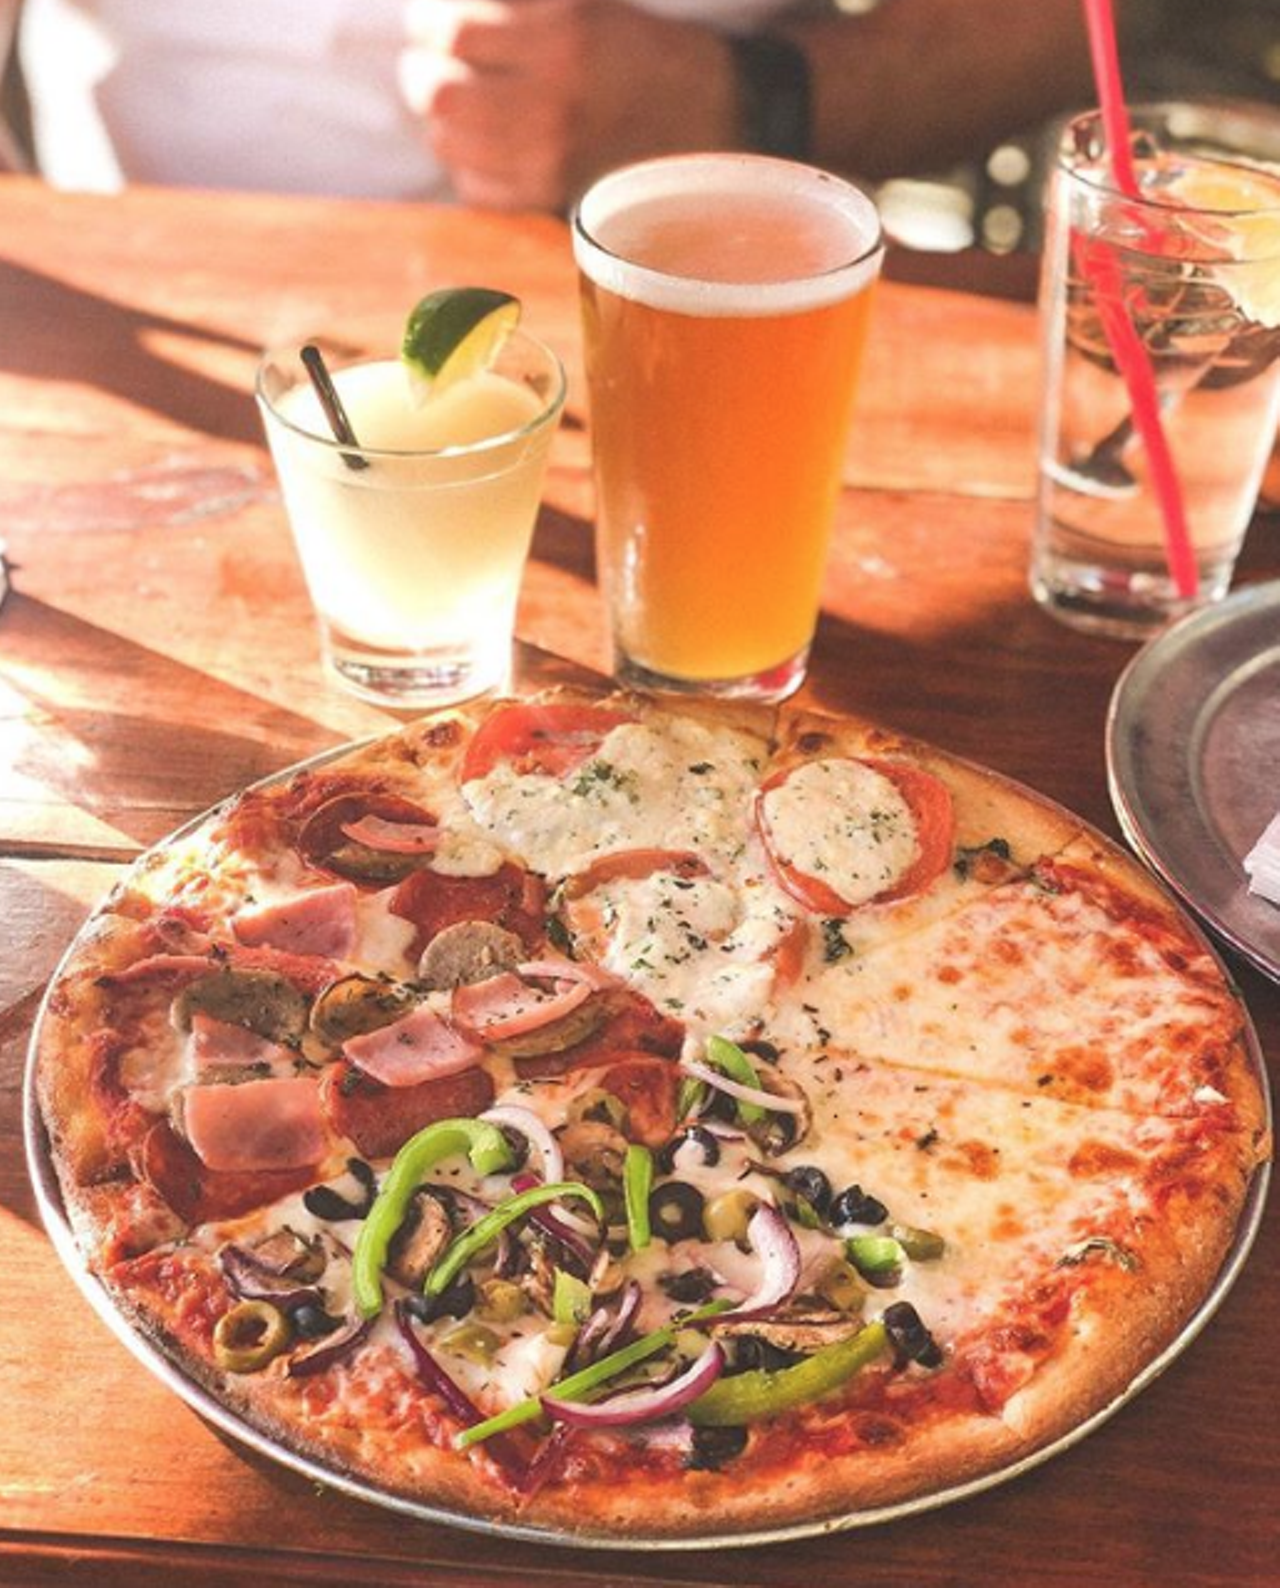 Austin Street Pizza & Craft Beer
For Guillermo Garza, owner of the popular downtown restaurant Guillermo’s, simple is best. The restaurateur is dedicated to creating a pizza joint with simple seating, great slices and craft brews at 1214 Austin Street.
Photo via Instagram / foodieee.couple